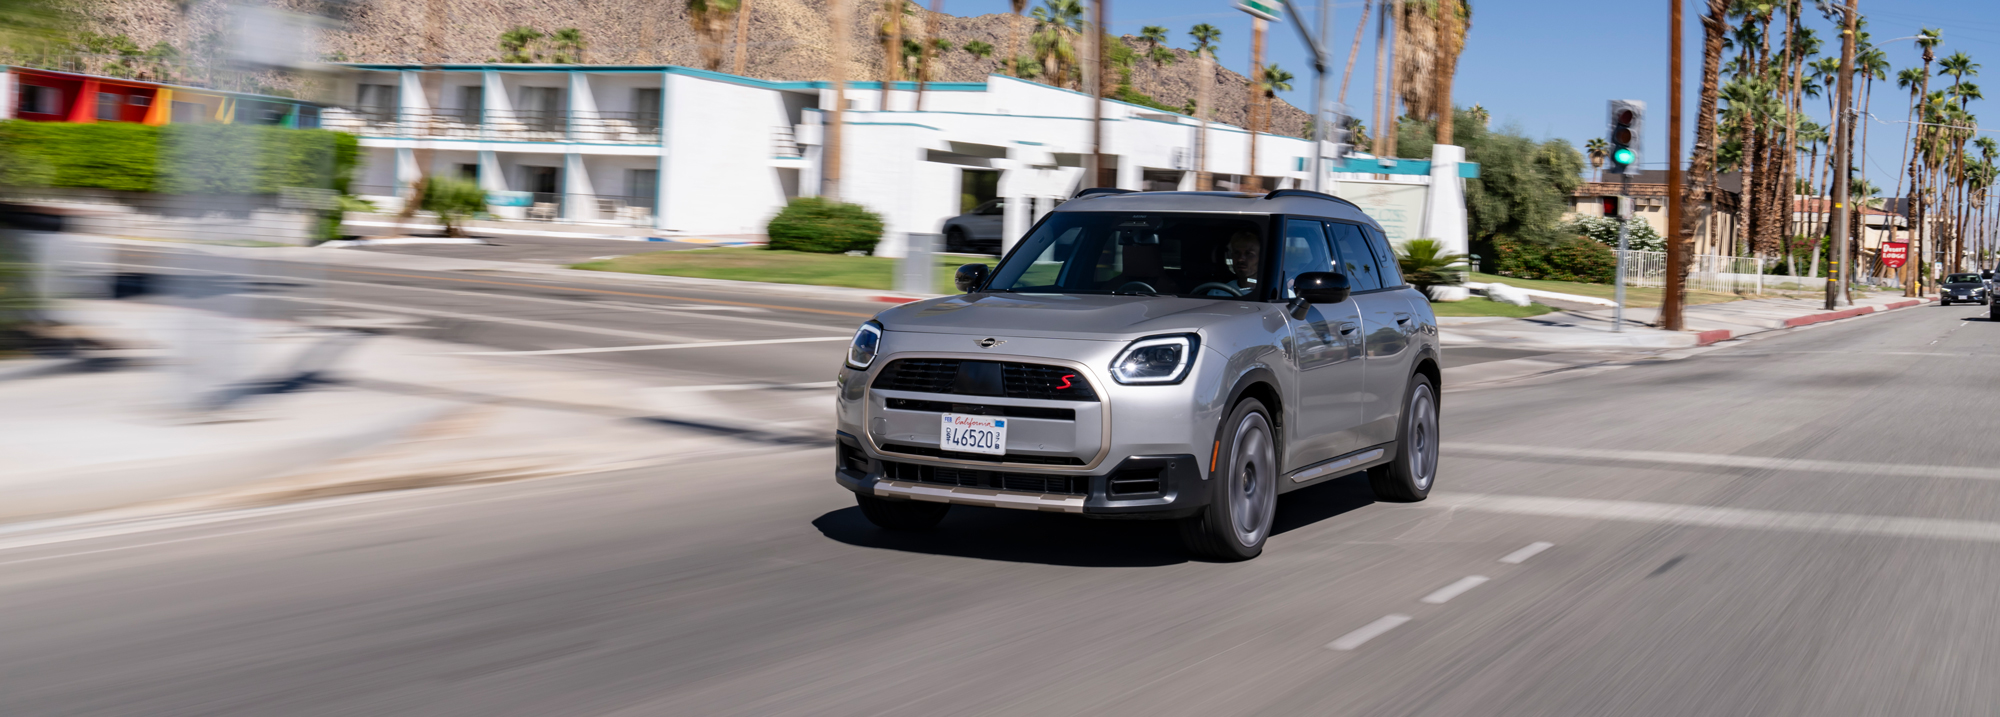 All-new Mini Countryman S ALL4 video-banner